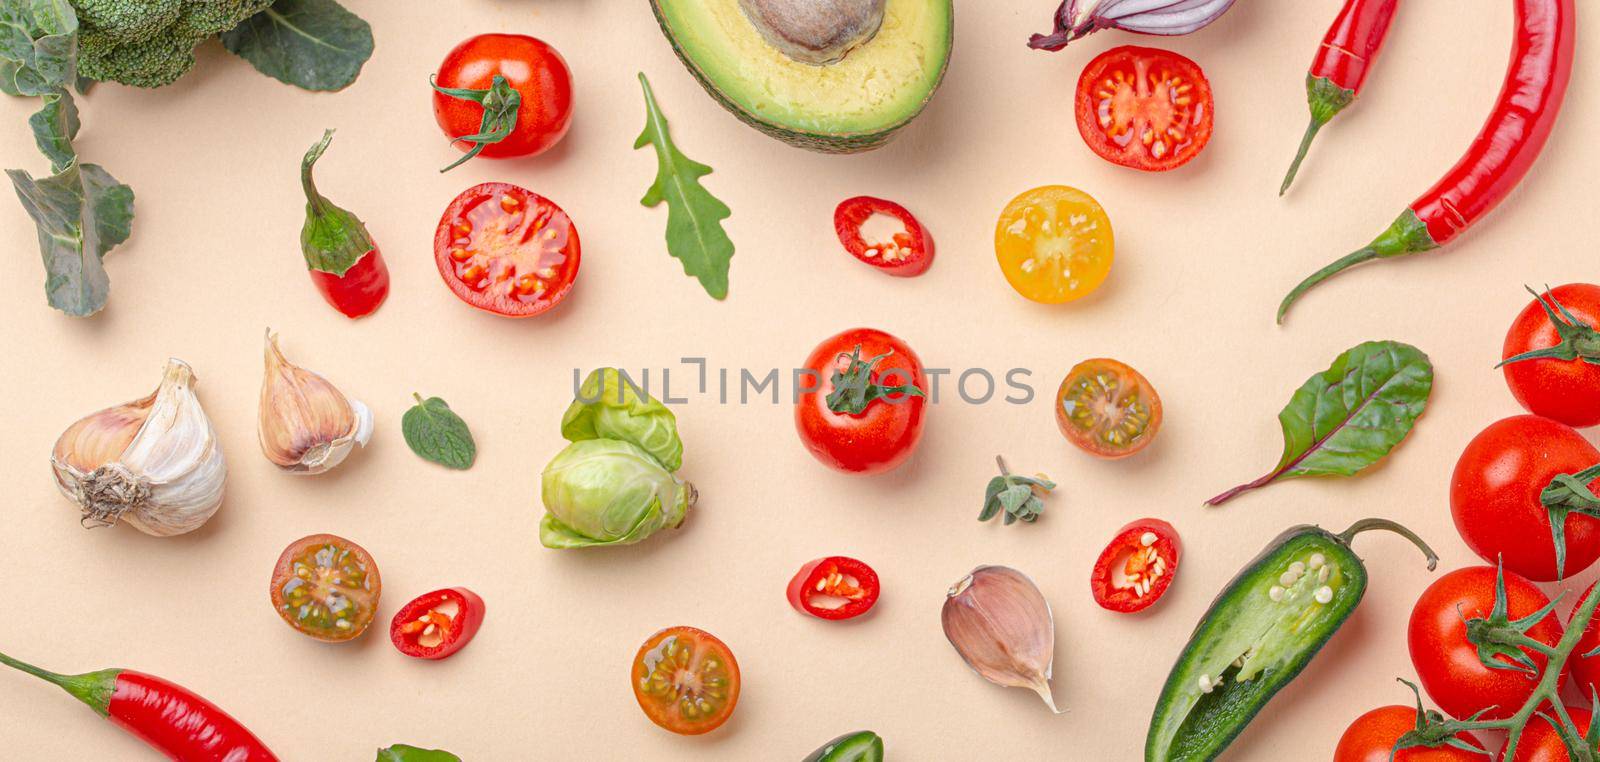 Creative cooking healthy organic food concept background made of colourful fruit and vegetables on beige background flat lay: tomatoes, broccoli, avocado, onion, garlic, herbs top view.